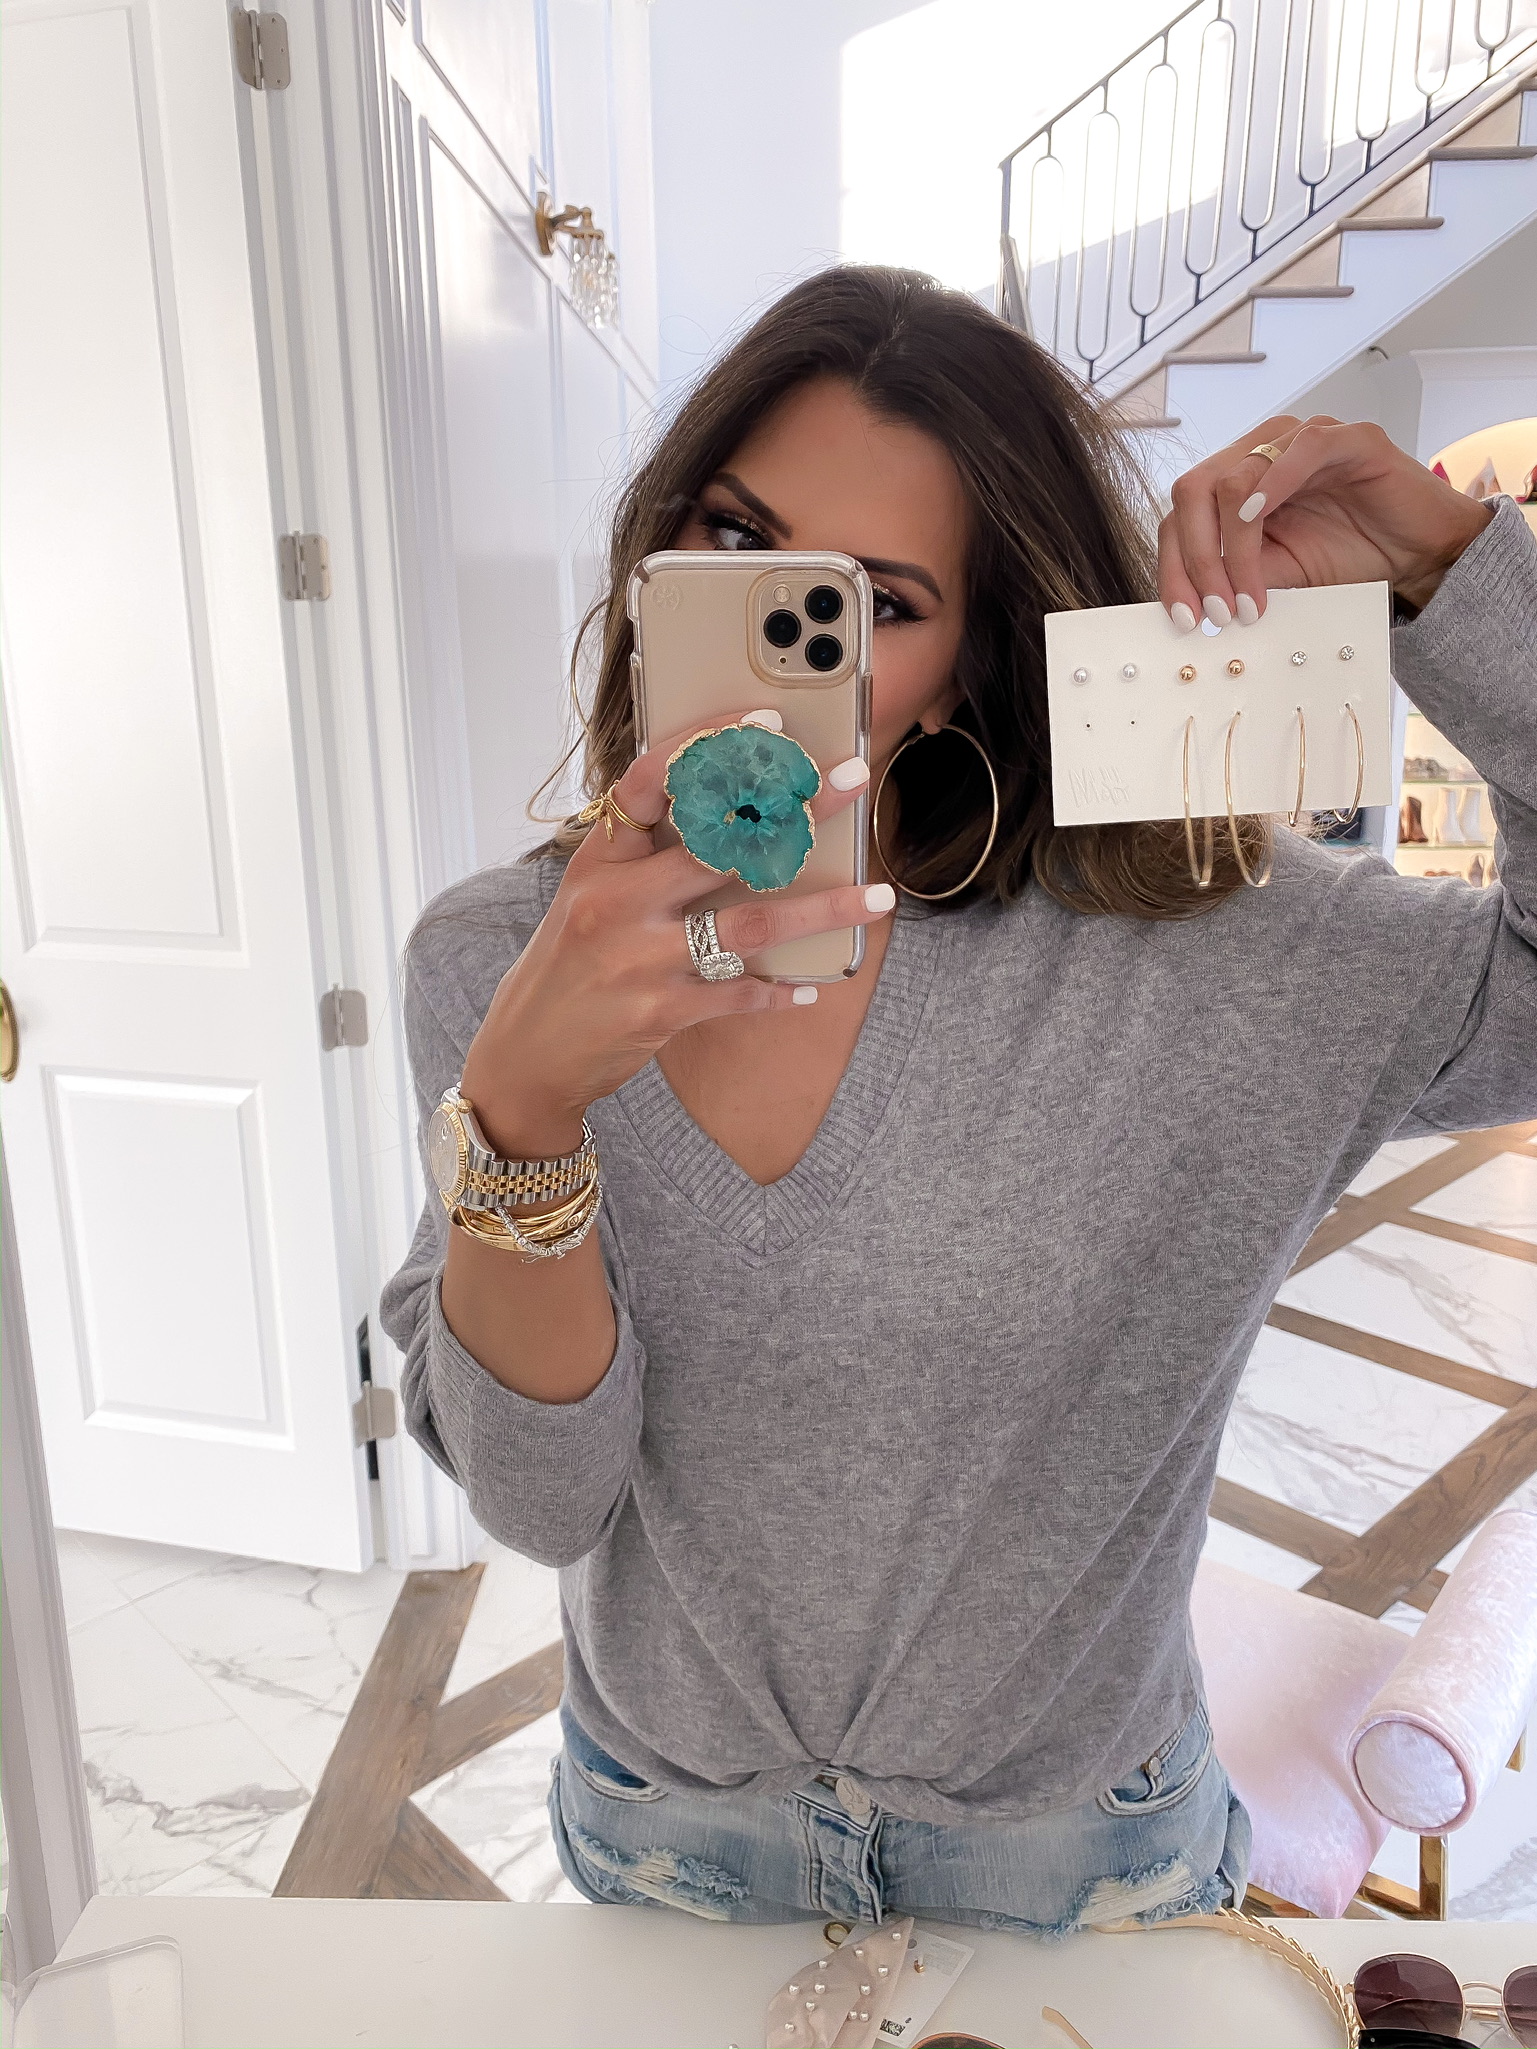 Blogging Newsletter by popular US life and style blog, The Sweetest Thing: image of a woman holding some H&M 6-pack Earrings and Studs.